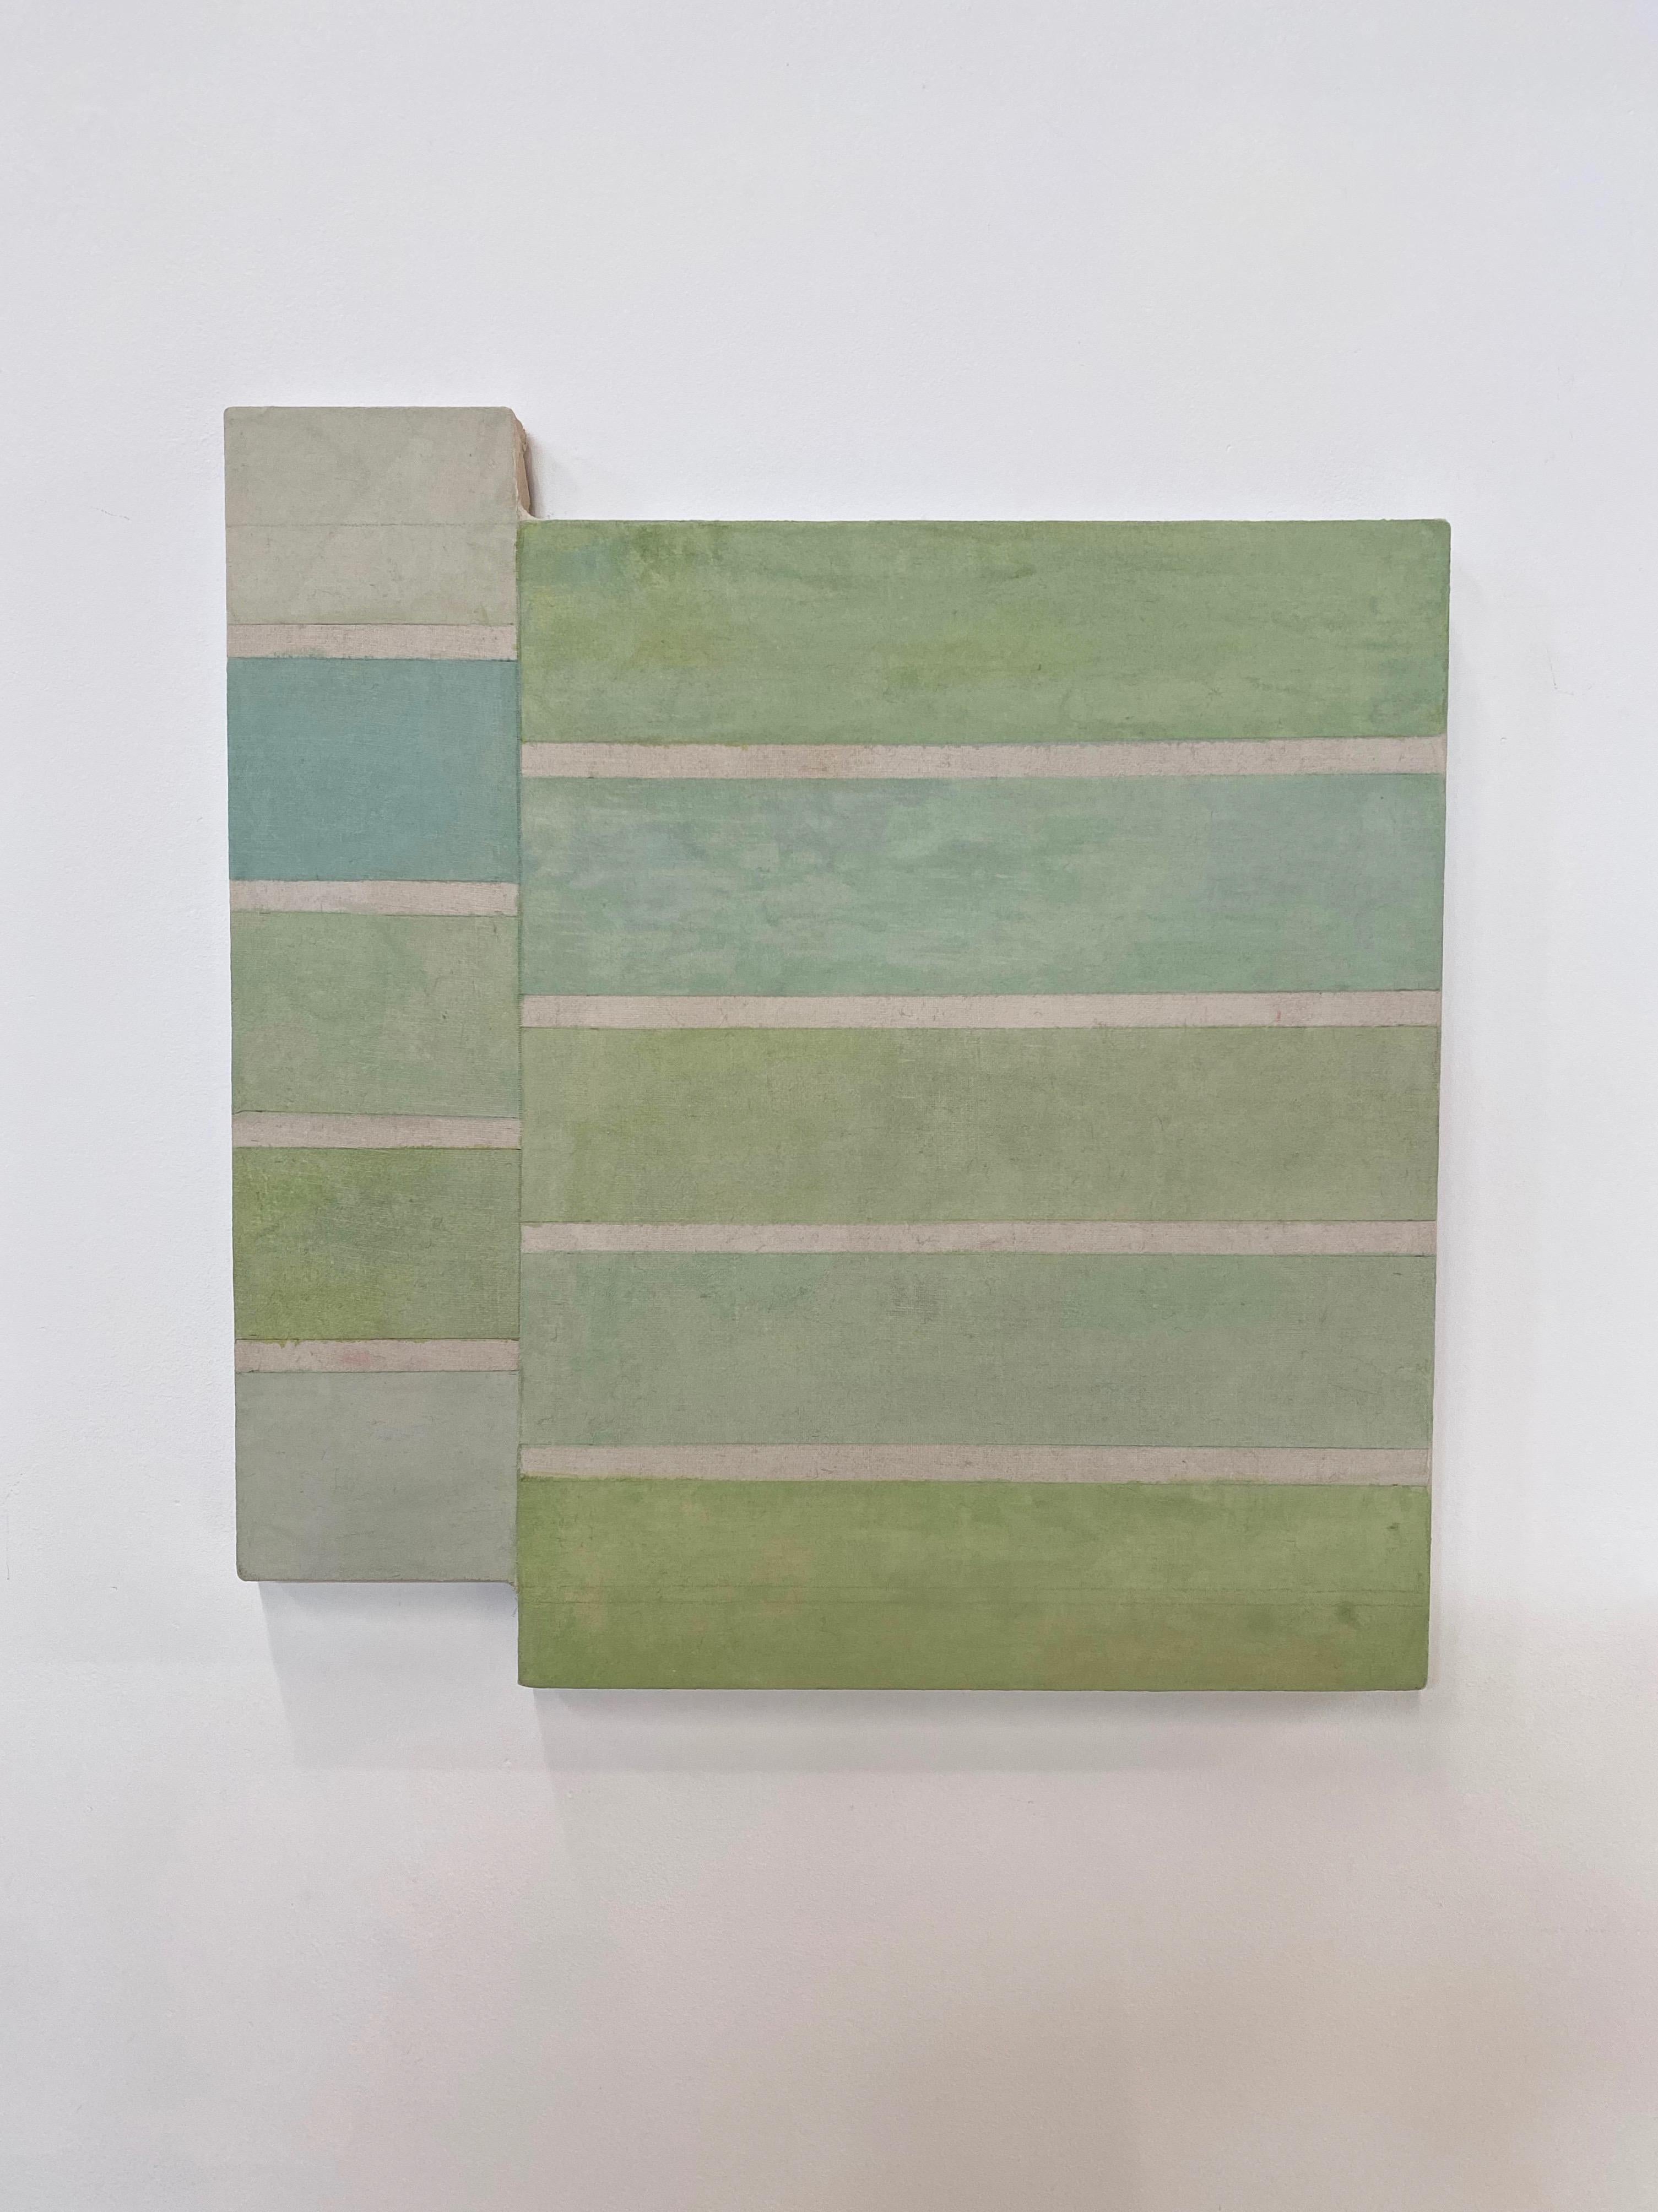 Carefully ordered horizontal blocks of color in pale green, light teal blue and soft sage are luminous against thinner neutral sections of exposed beige linen in this acrylic painting on linen mounted on shaped panel. Signed, dated and titled on